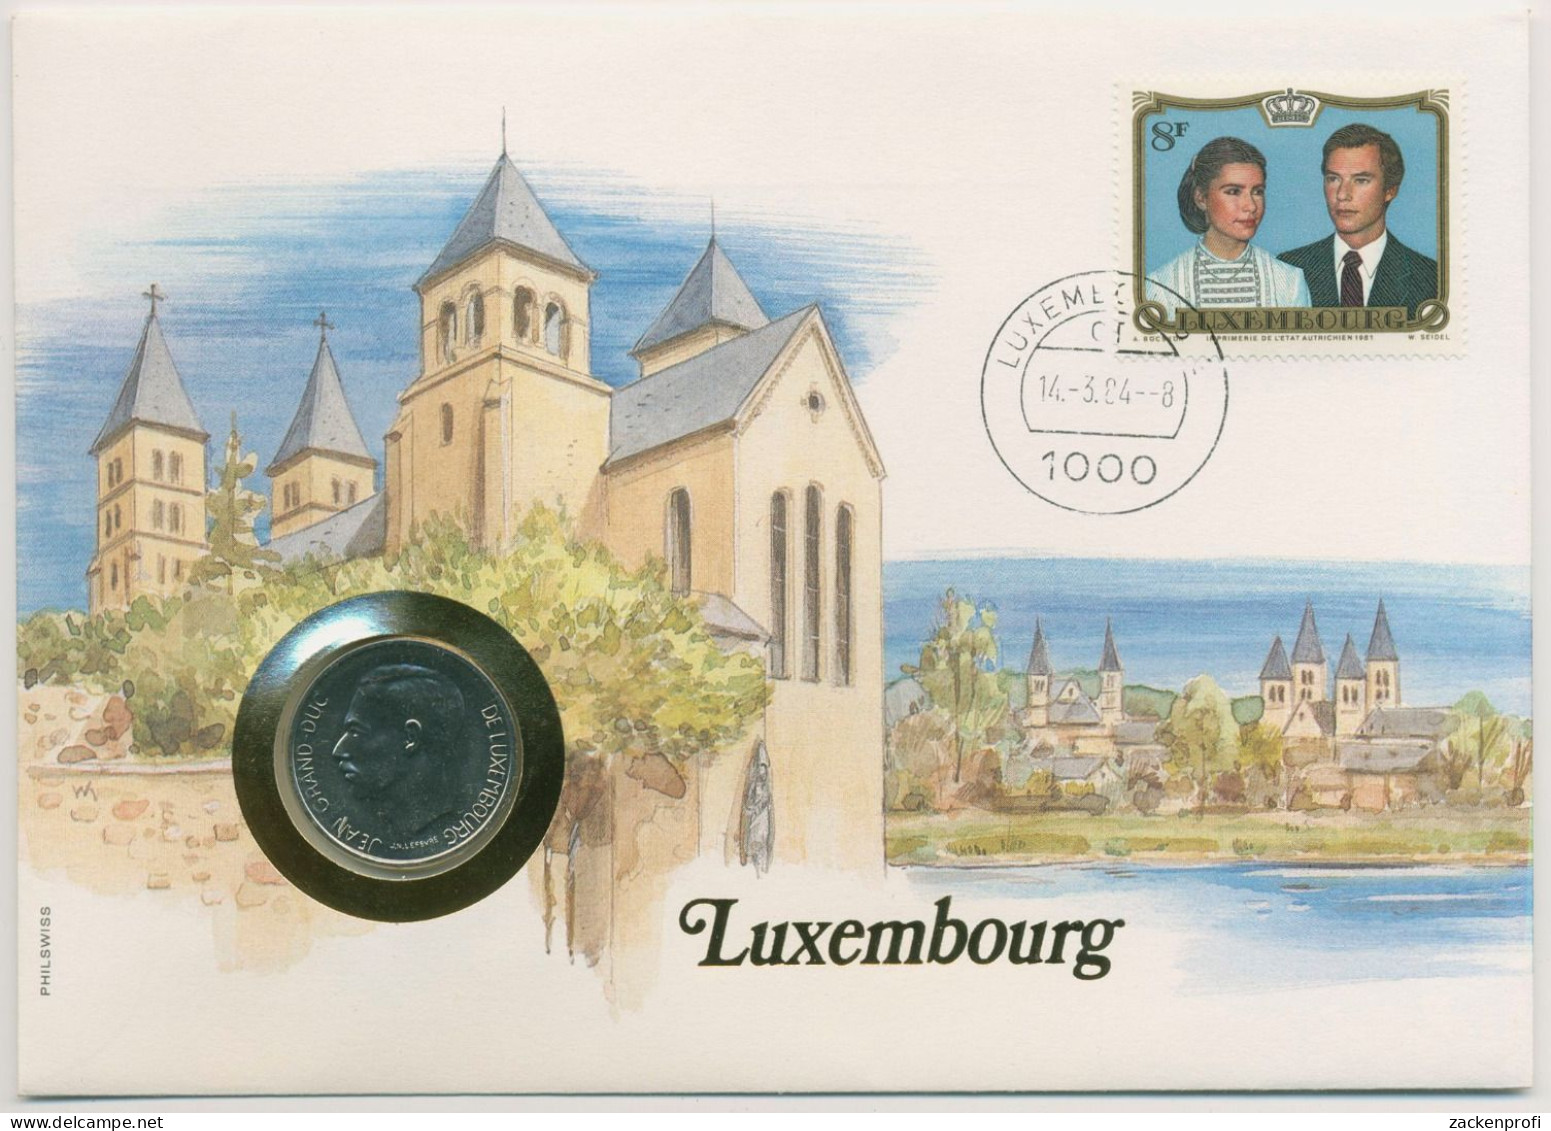 Luxemburg 1984 Kathedrale Numisbrief 10 Francs (N161) - Luxembourg